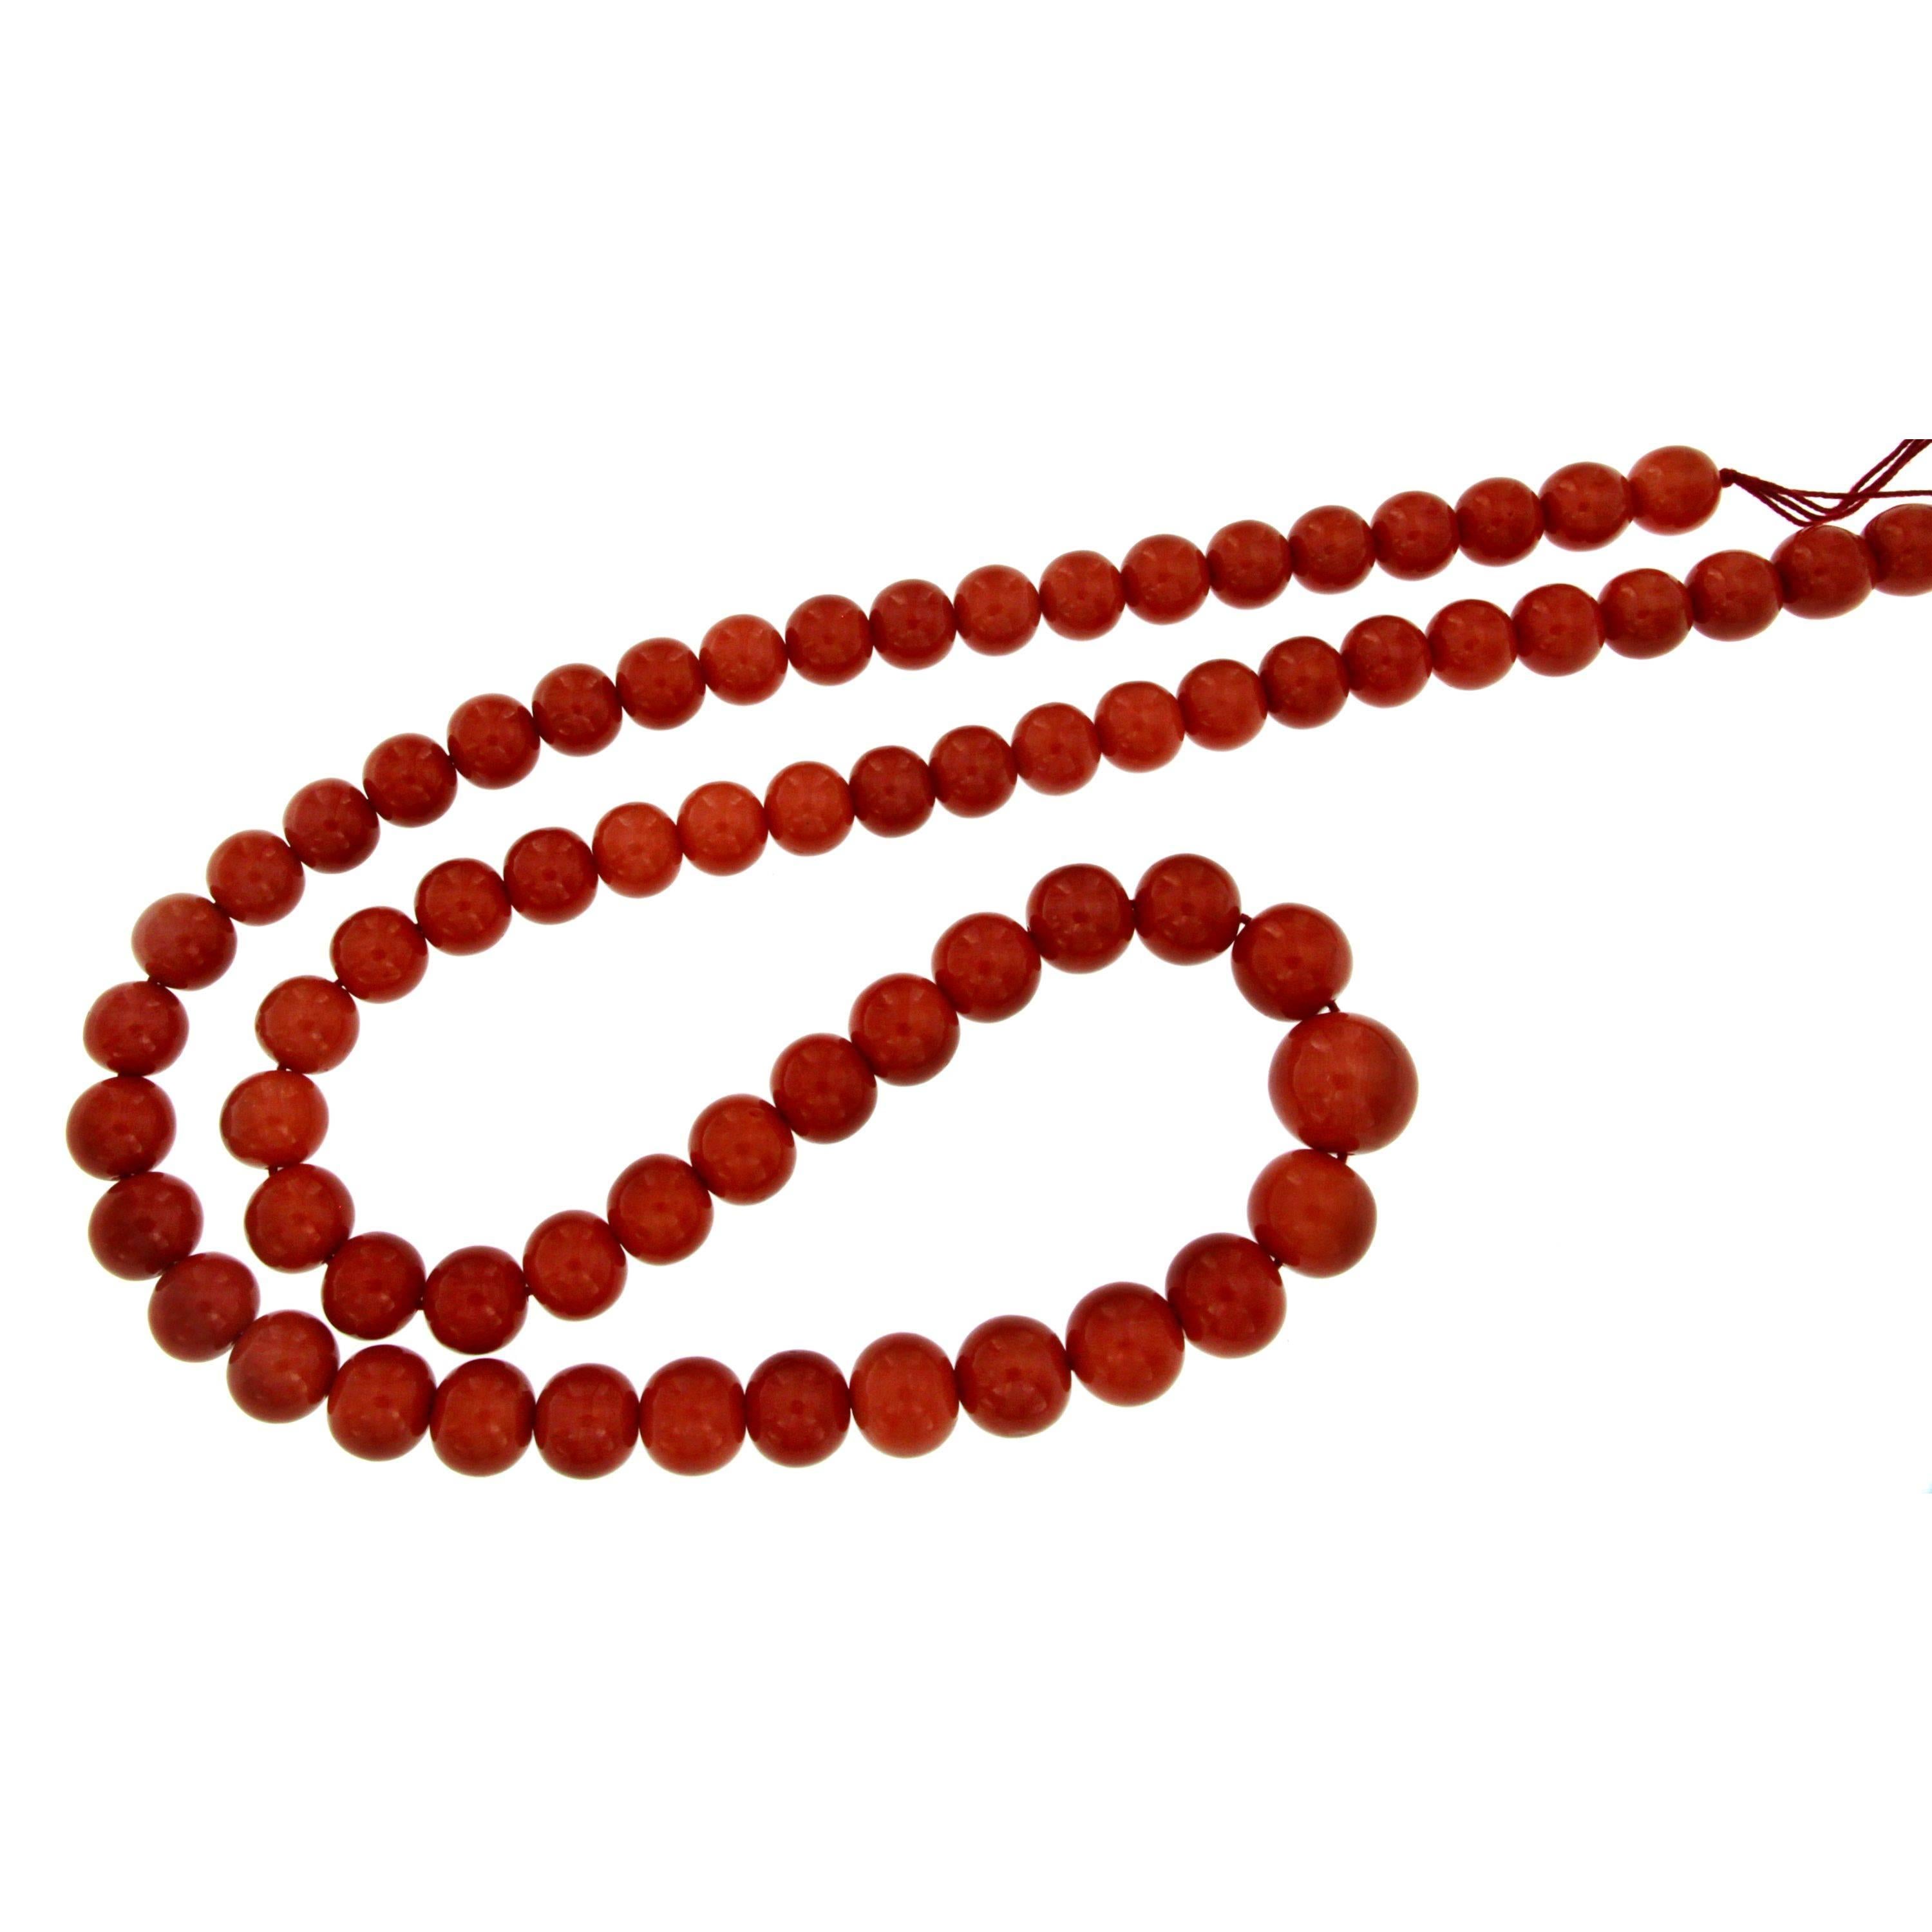 A beautiful necklace strand of fine Momo Coral.
The coral is one of the greatest variety, 100% natural not dyed or worked with any resin or other synthetic materials free from any matural blemish whatseover. No clasp
Measures: 25.19 inches
WEIGHT: